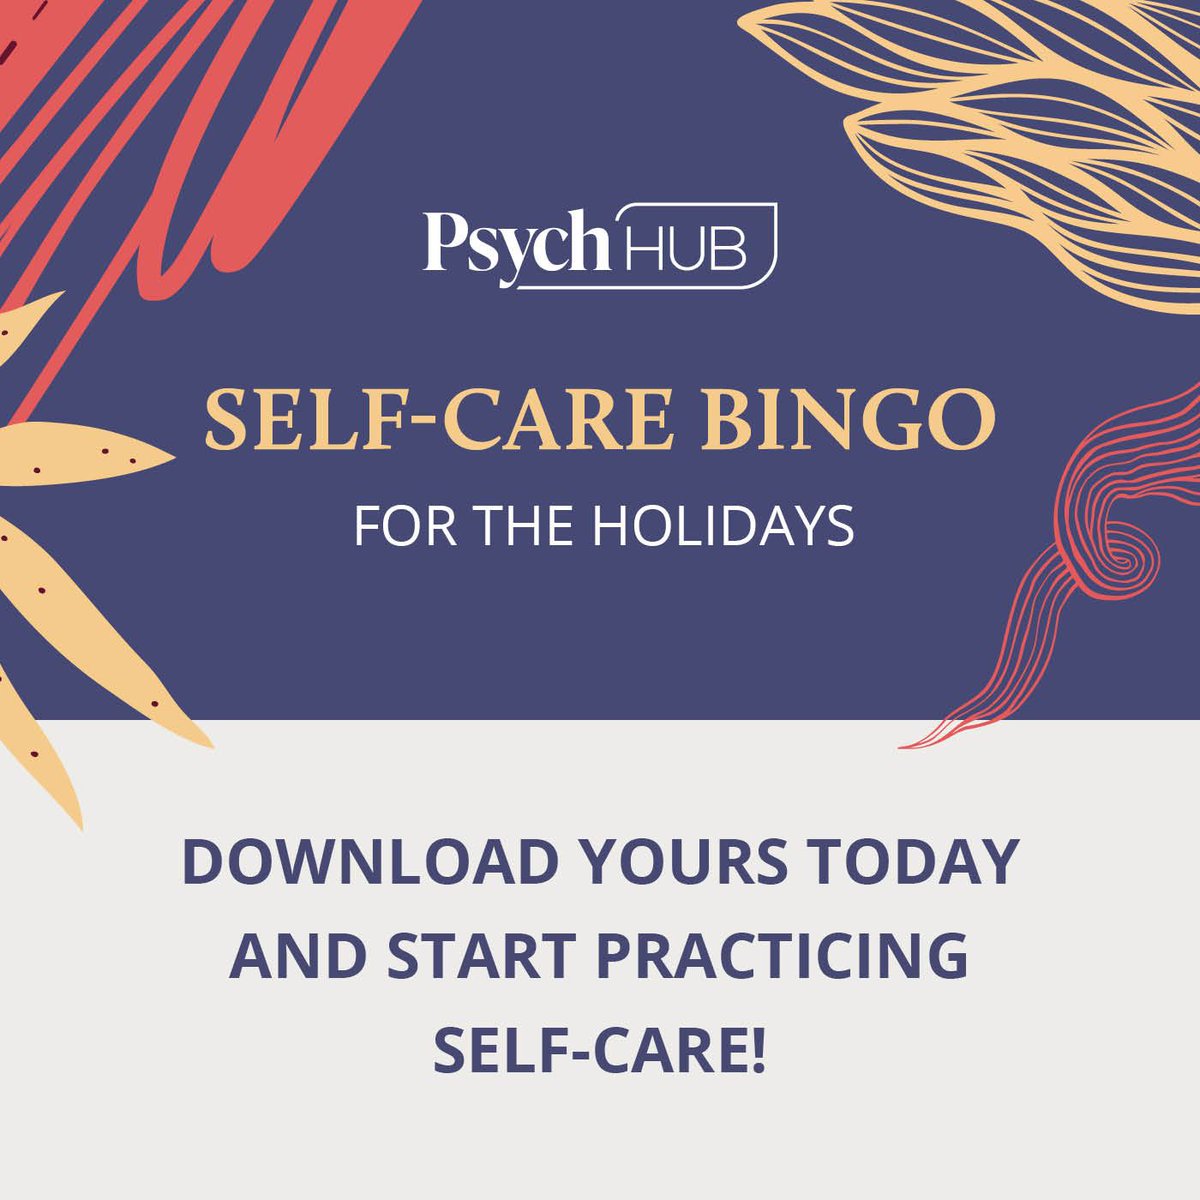 'Tis the season for taking care of your mental health! With our free self-care bingo, you can get inspiration for incorporating small, mindful acts into your daily routine. Download the bingo card now and start prioritizing your mental health. bit.ly/3T5IA7a